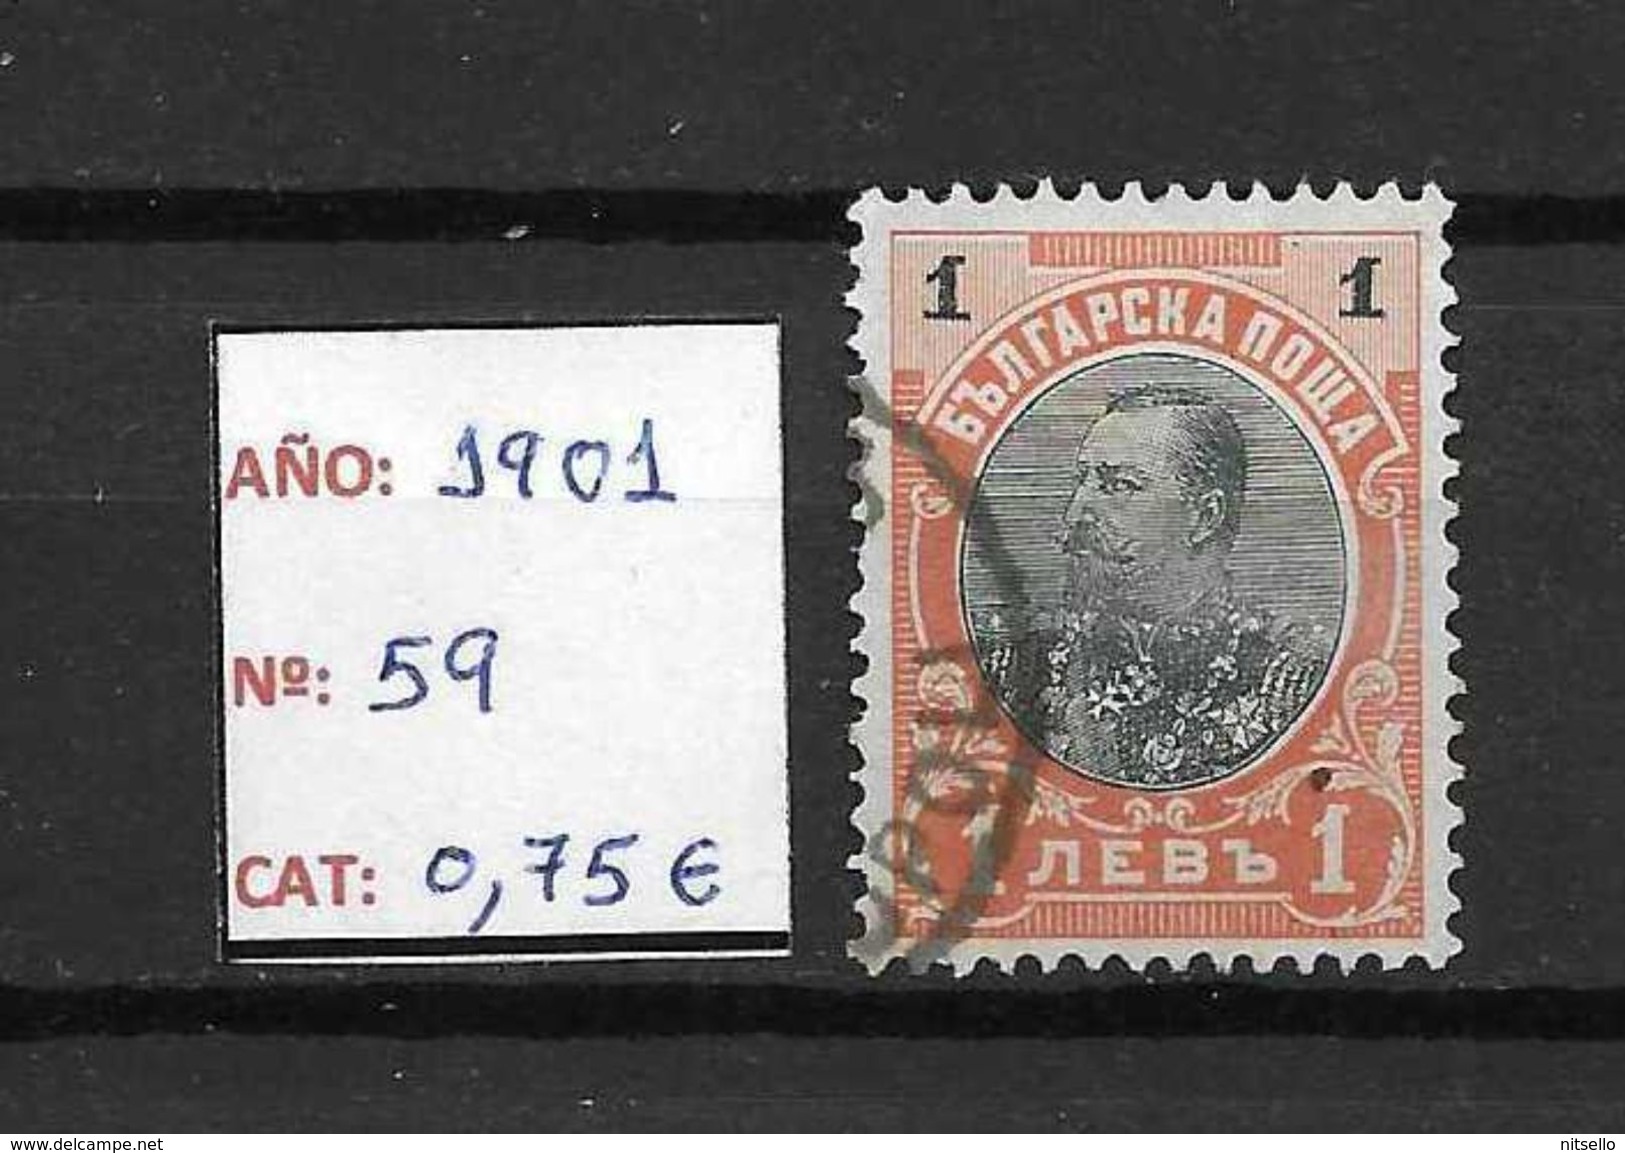 LOTE 1419  ///  ALBANIA  1901     YVERT Nº: 59    CATALOG./COTE: 0.75€ - Used Stamps